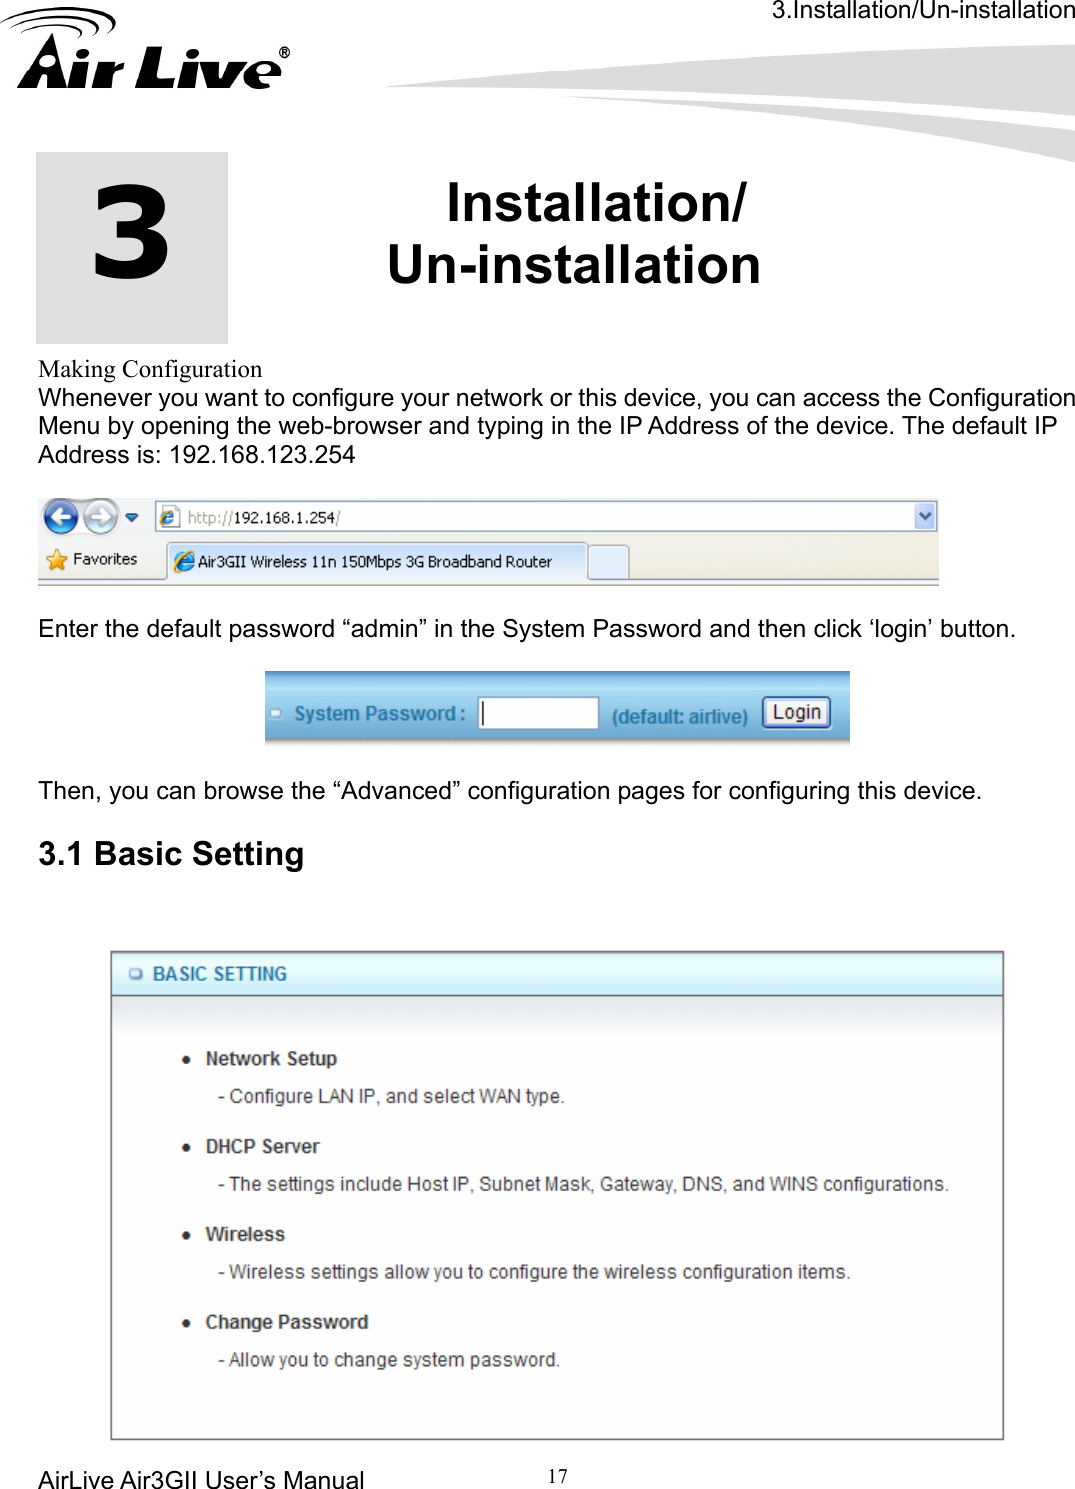 3.Installation/Un-installation AirLive Air3GII User’s Manual 17             Making Configuration Whenever you want to configure your network or this device, you can access the Configuration Menu by opening the web-browser and typing in the IP Address of the device. The default IP Address is: 192.168.123.254   3  3.Installation/ Un-installation    Enter the default password “admin” in the System Password and then click ‘login’ button.    Then, you can browse the “Advanced” configuration pages for configuring this device.  3.1 Basic Setting  